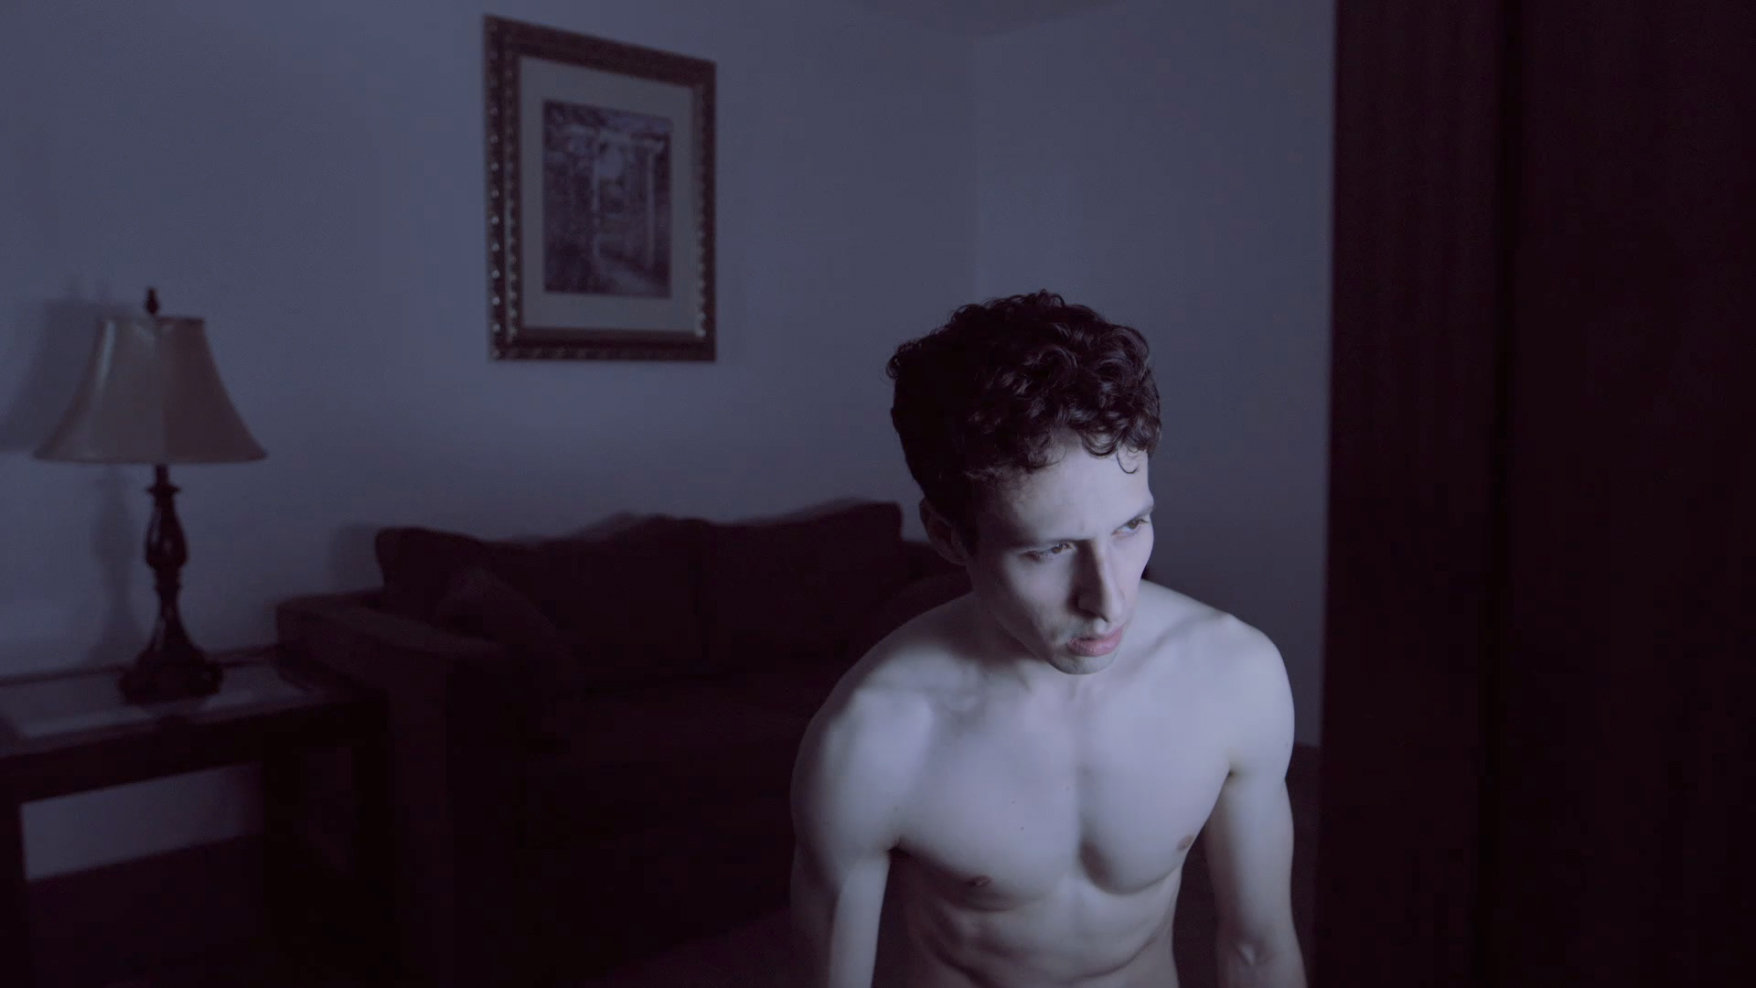 Zachary J. Luna as David Whiting in The David Whiting Story (2014)